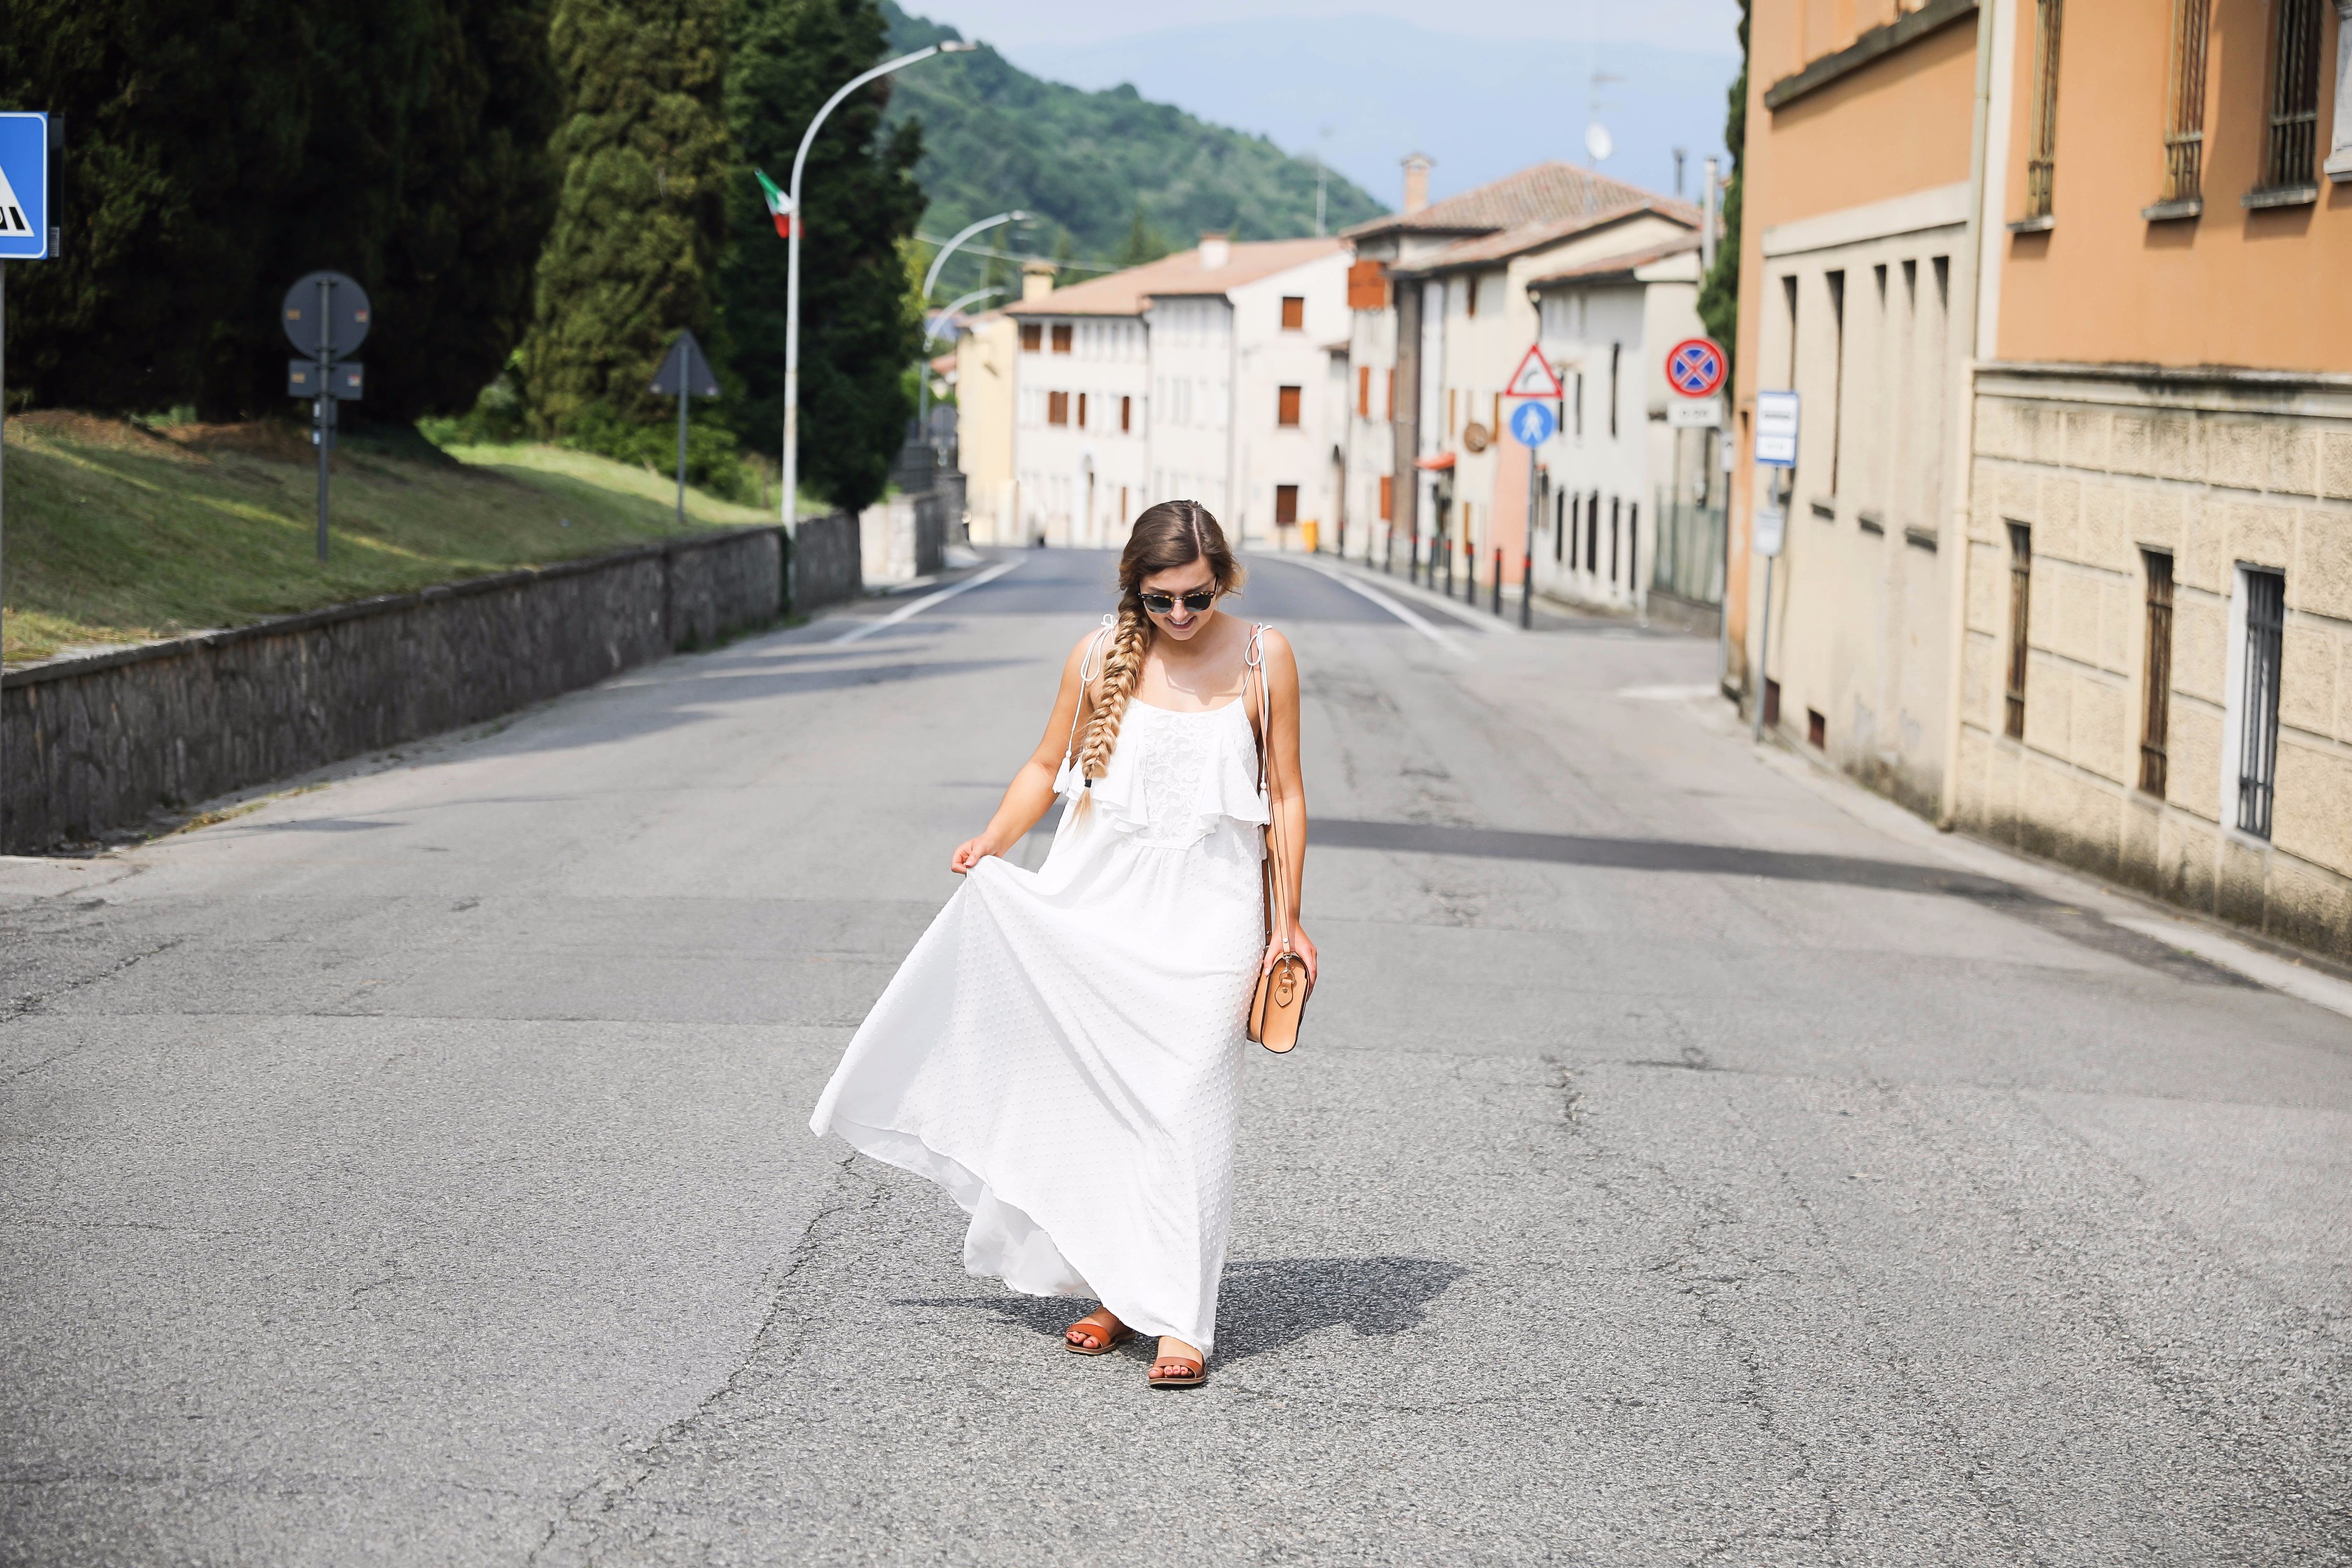 DOSES OF STYLE on Instagram: “White backless summer dress